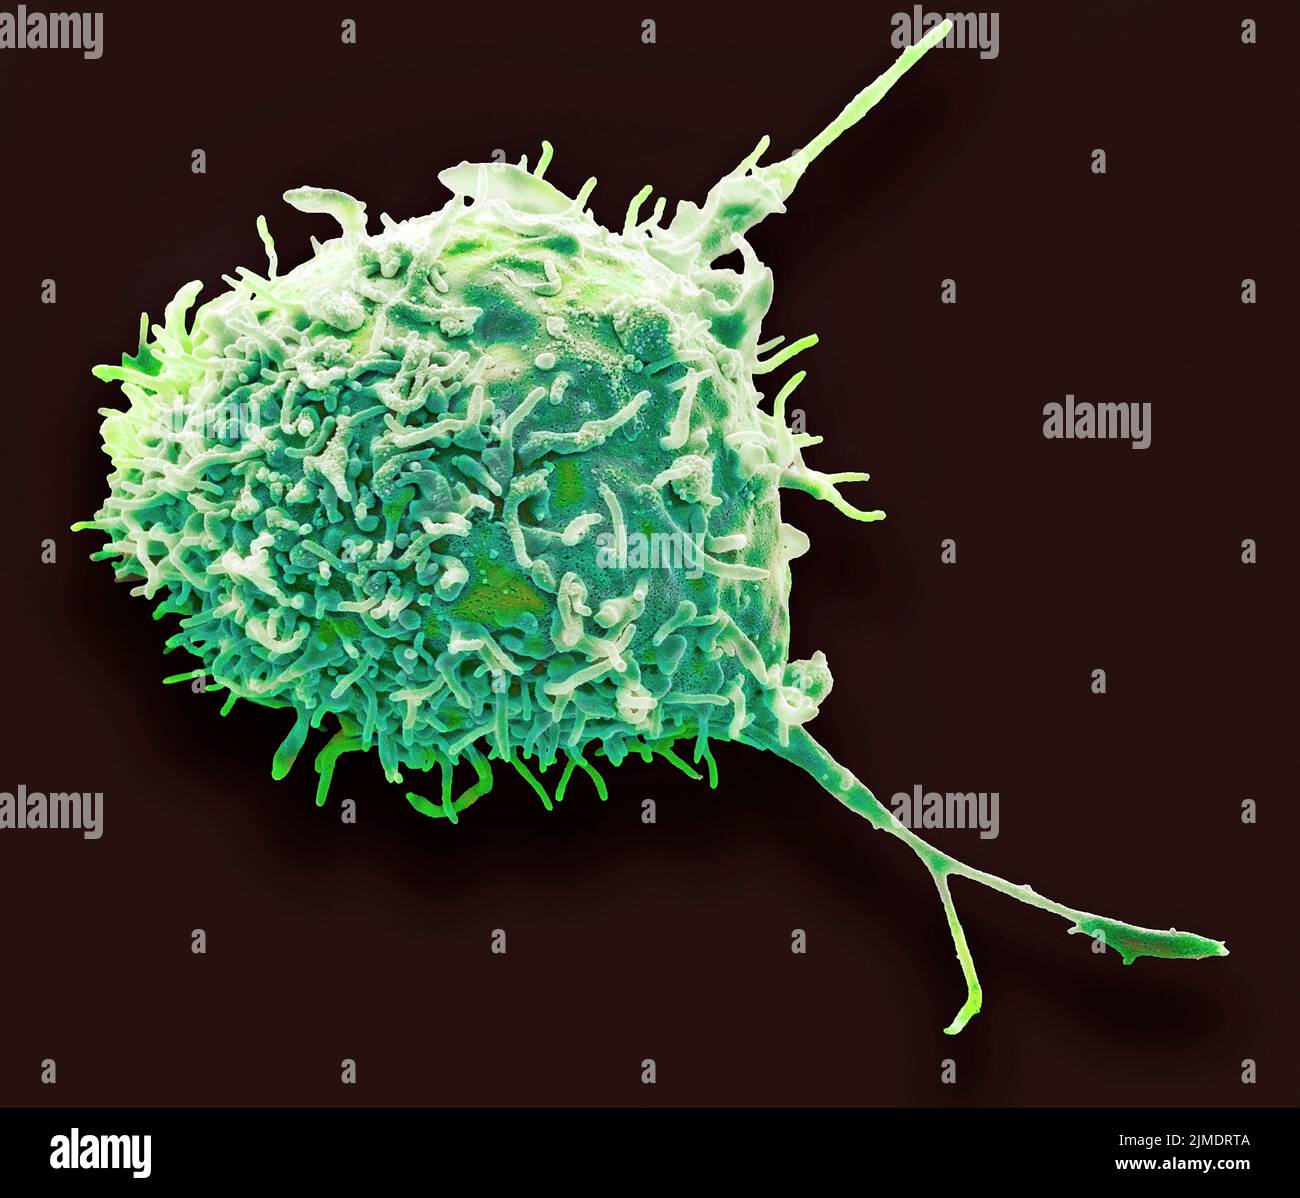 Mesenchymal stem cell. Coloured scanning electron micrograph (SEM) of a human mesenchymal stem cell (MSC). MSCs are multipotent stromal (connective ti Stock Photo